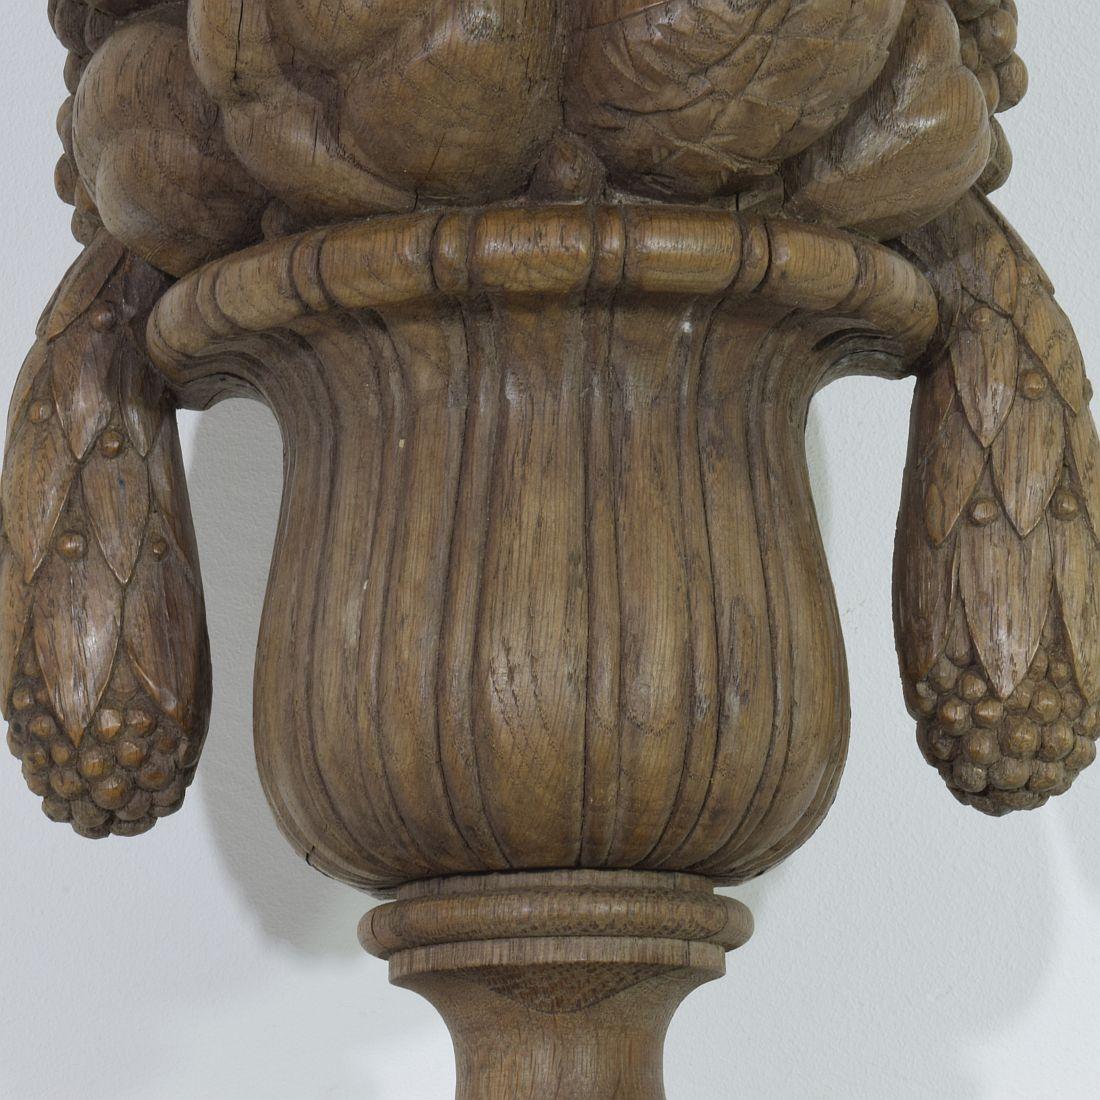 French Early 19th Century Neoclassical Hand Carved Oak Vase Ornament/ Finial For Sale 9